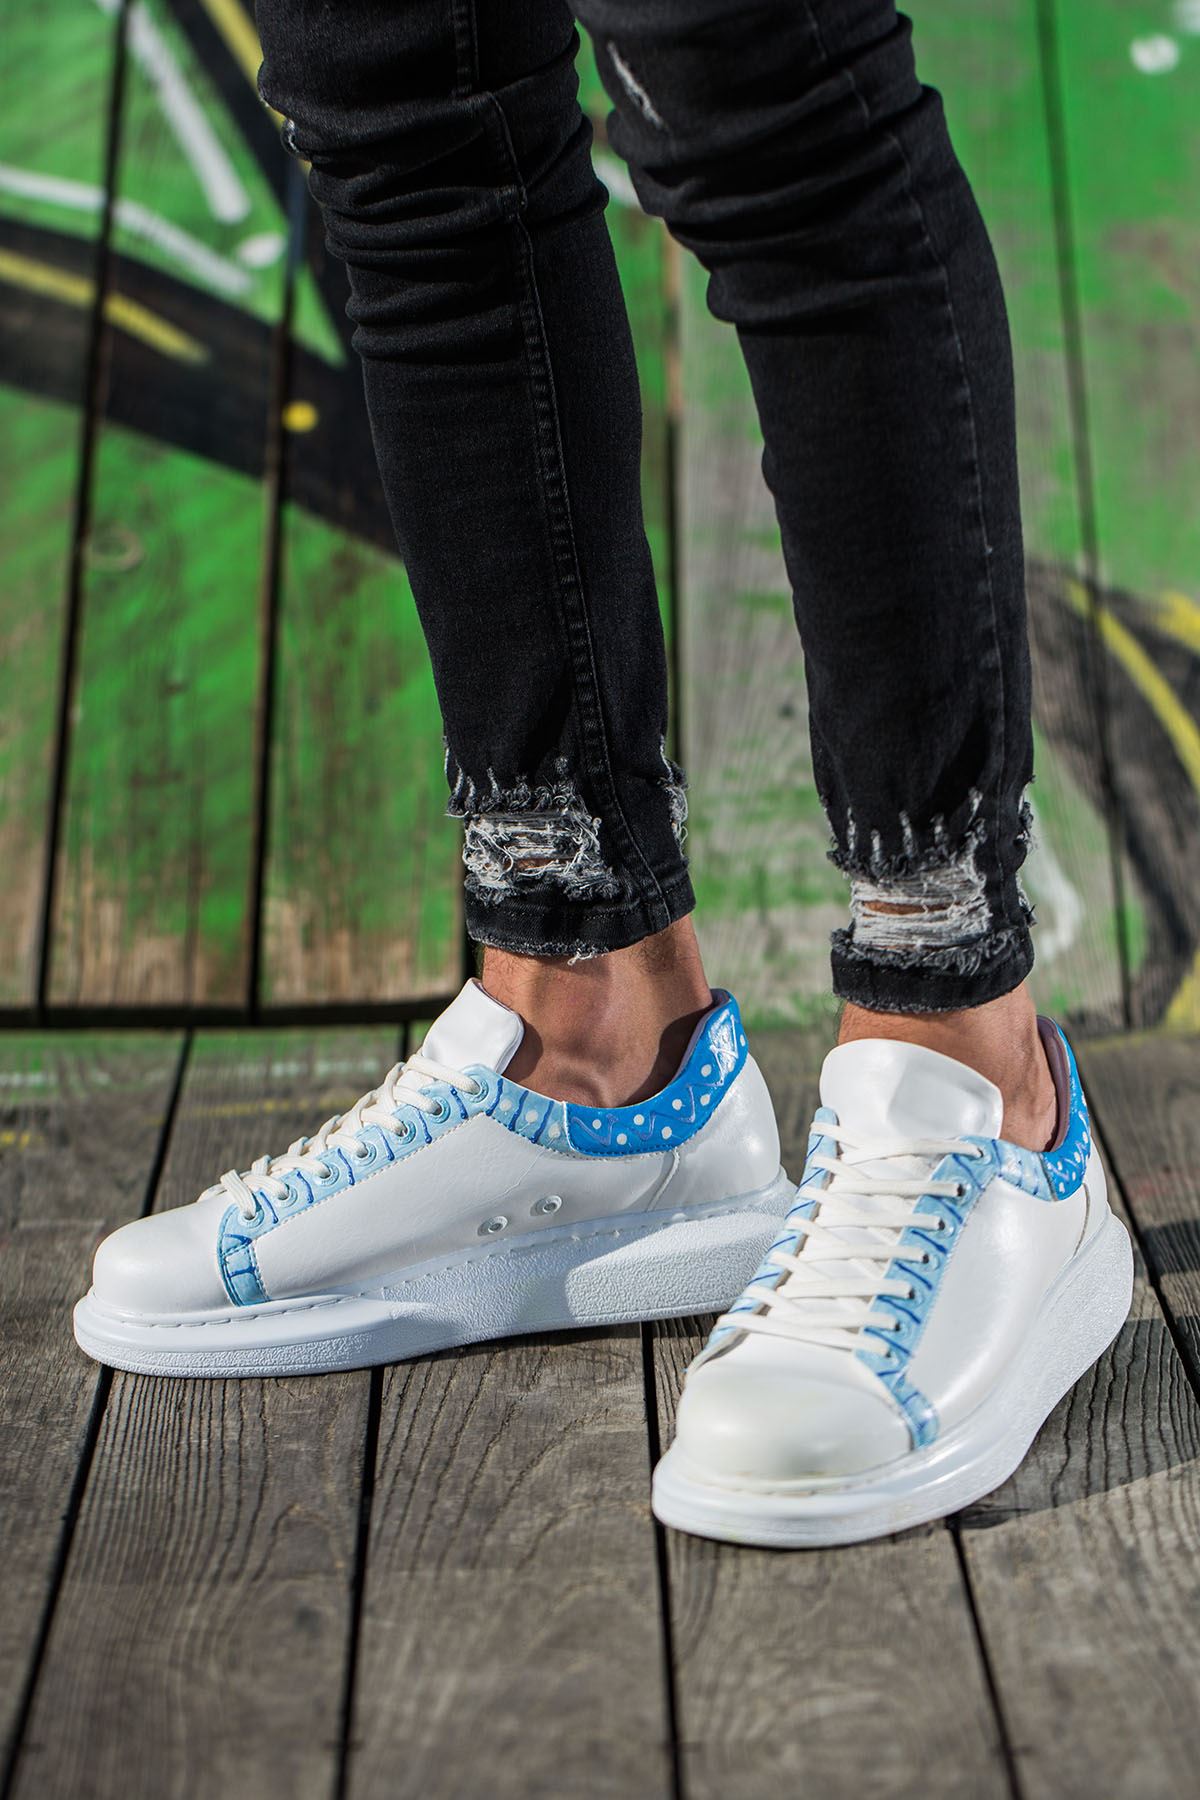 Chekich Men's and Women's Sneakers White Blue Spray Mixed Color Written Lace-up Splash Pattern Unisex Shoes Odorless Daily Weather Comfortable Lovers Different Options Hiking Spring Summer Autumn Seasons CH254 - 416